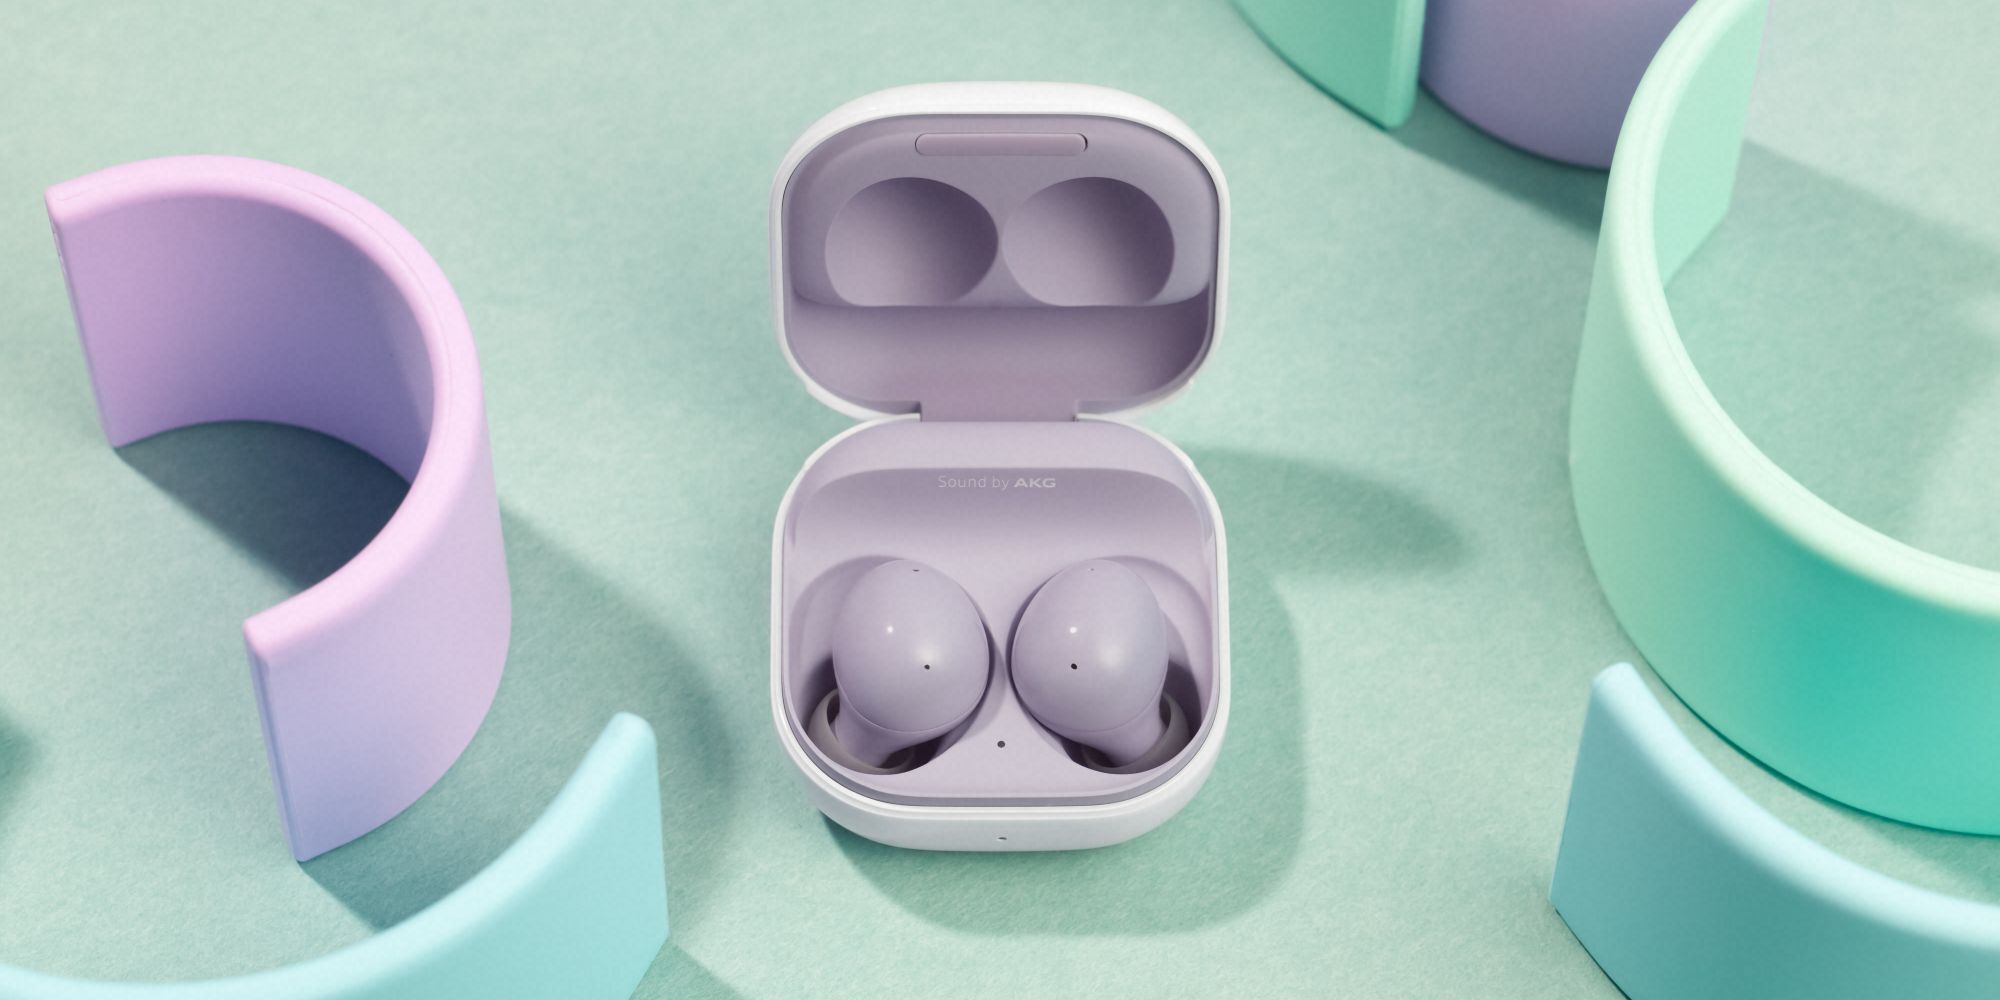 Samsung’s New Galaxy Buds 2 Cost Just 0 And Come With Noise Cancellation